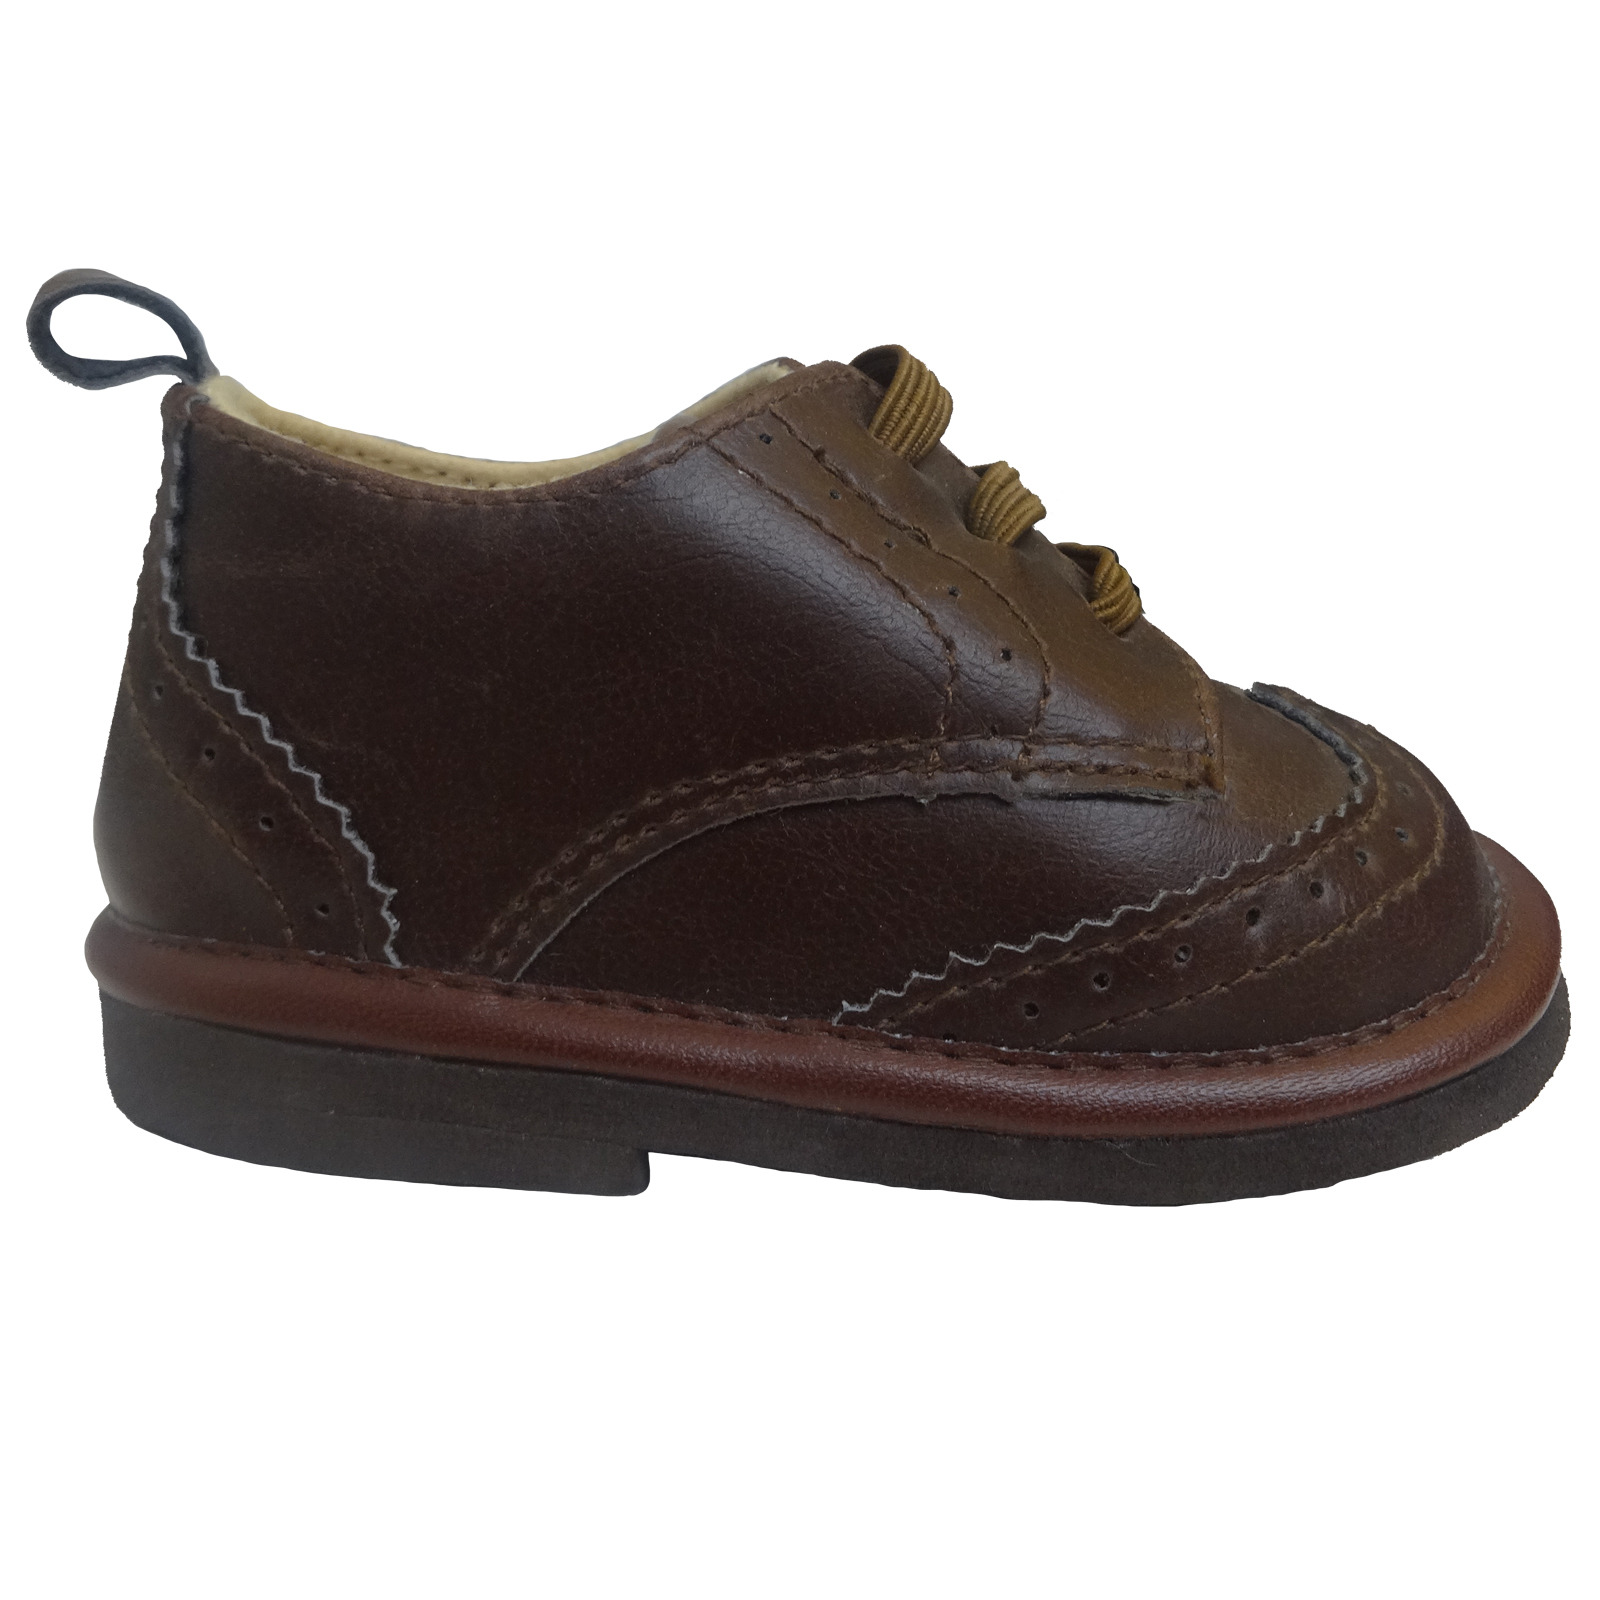 Baby Boy's Brown Wingtip Oxford - Shoes - Baby & Kids ...